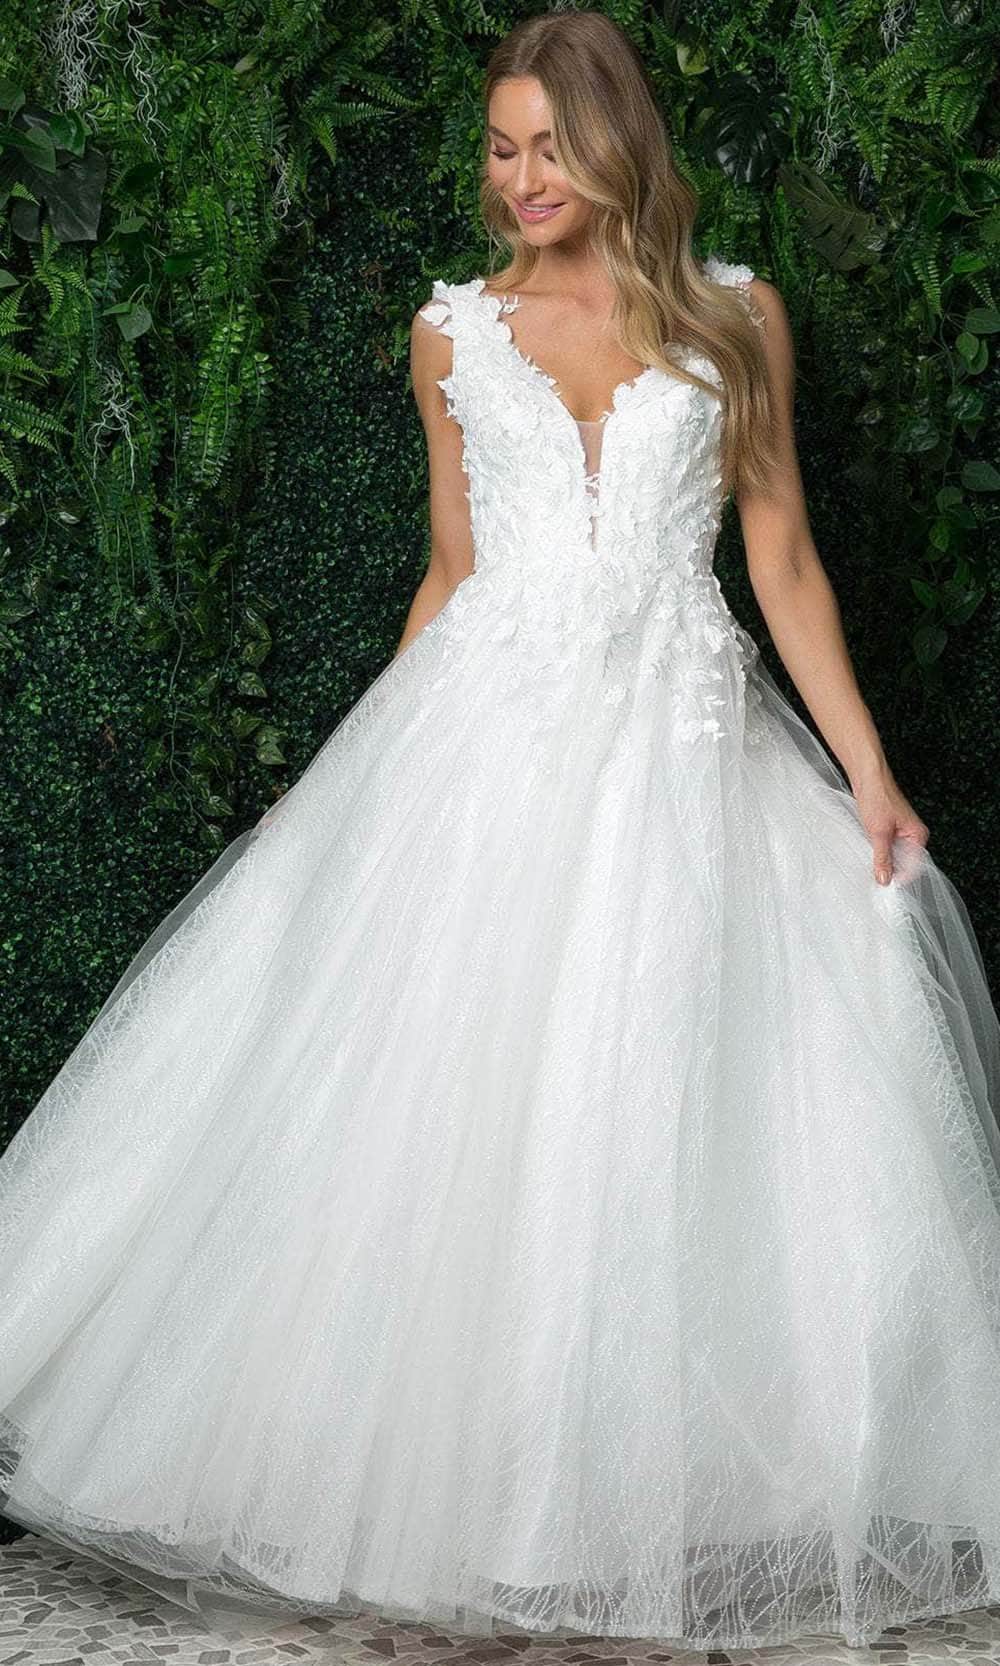 Nox Anabel JR930P - Sleeveless Plunging V-neck Wedding Gown
